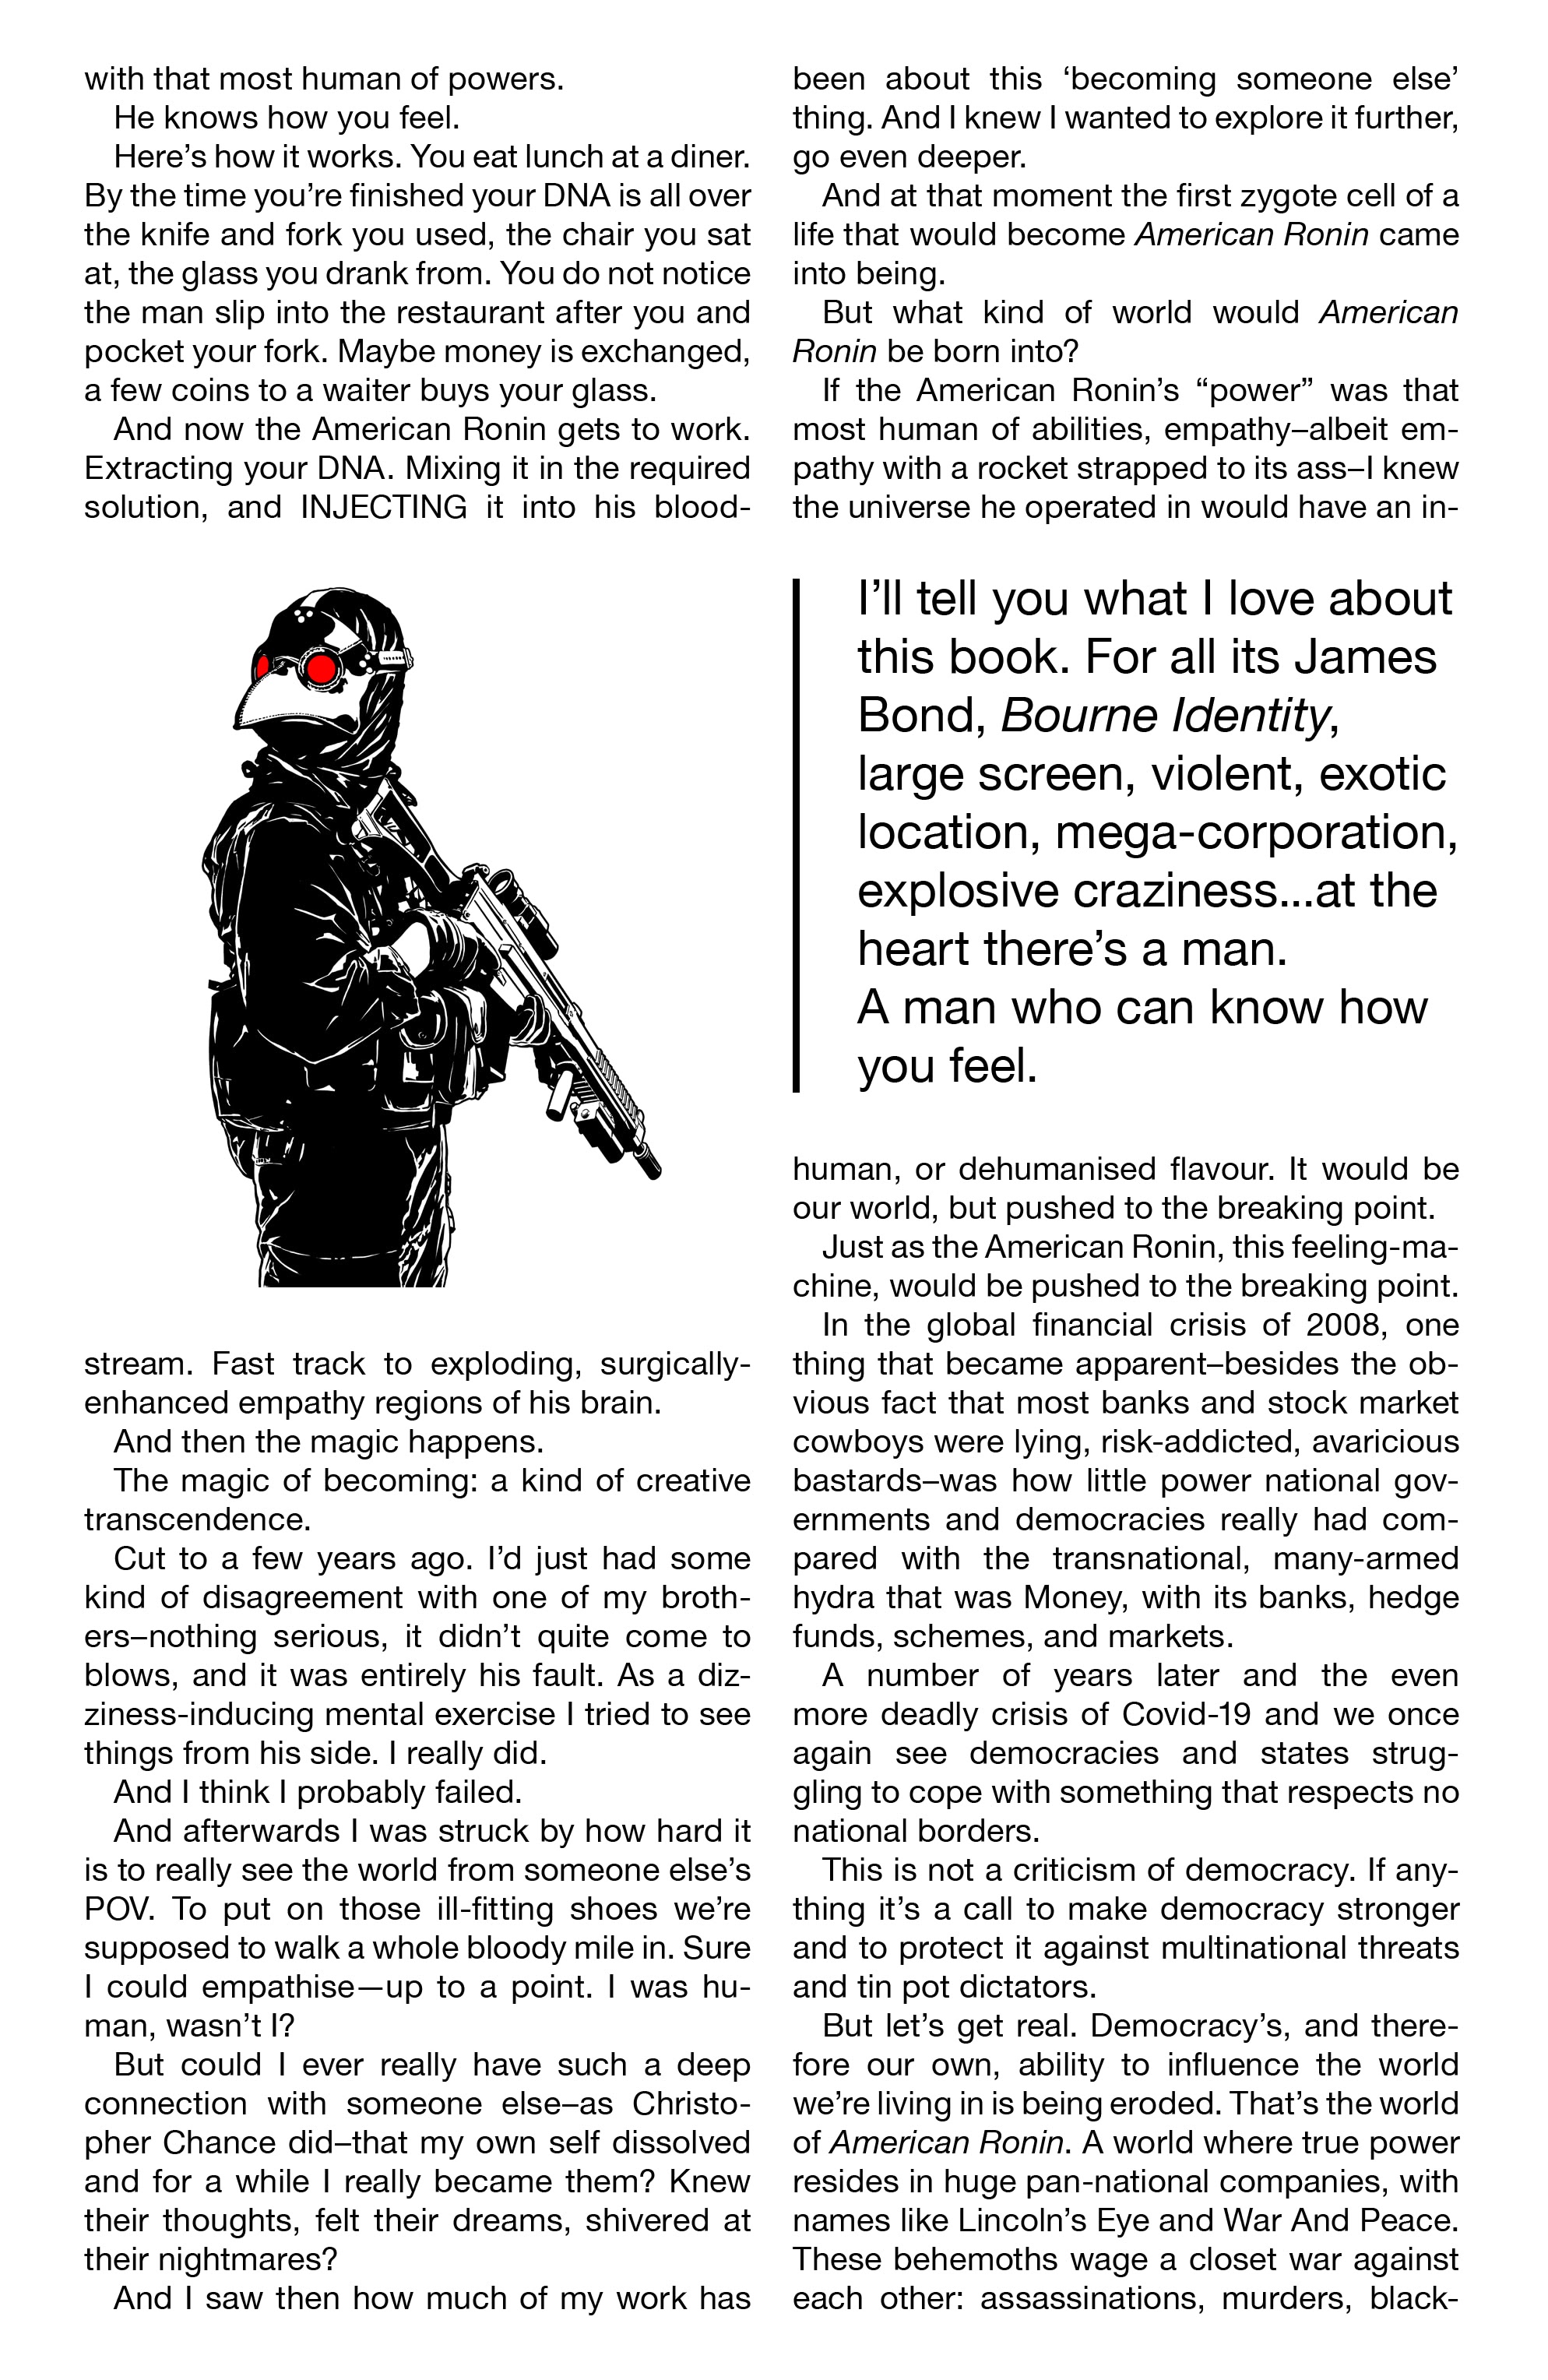 Read online American Ronin comic -  Issue #1 - 25